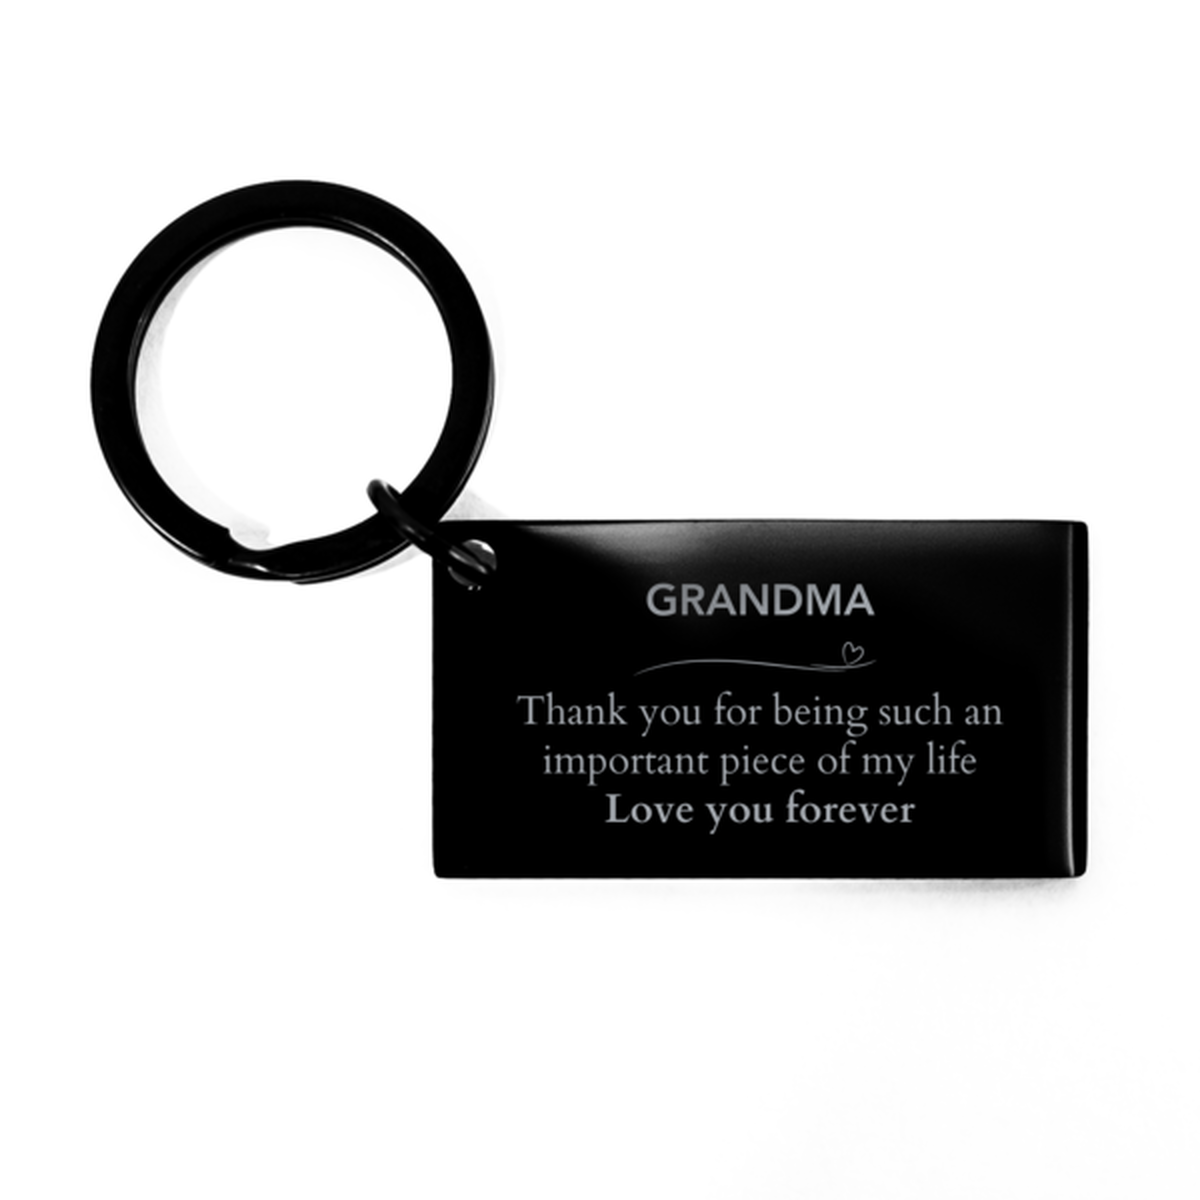 Appropriate Grandma Keychain Epic Birthday Gifts for Grandma Thank you for being such an important piece of my life Grandma Christmas Mothers Fathers Day